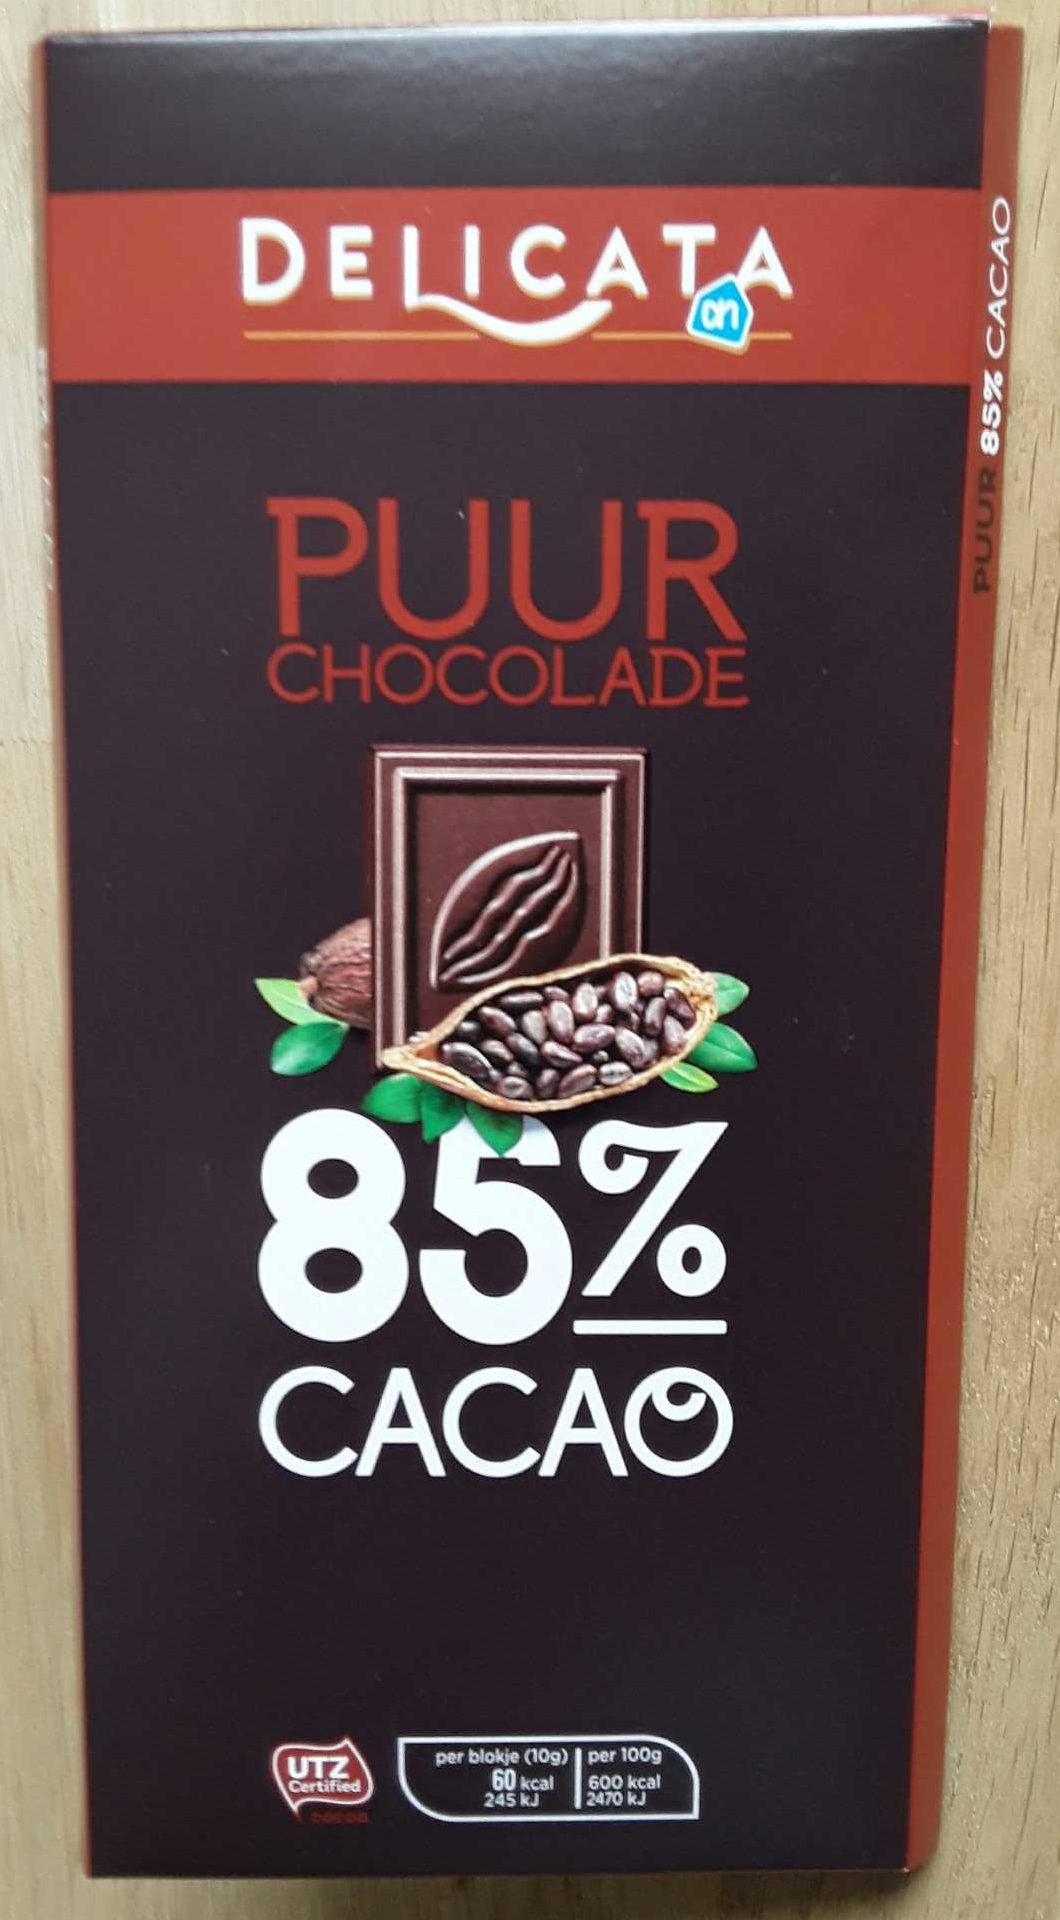 Puur chocolade - Product